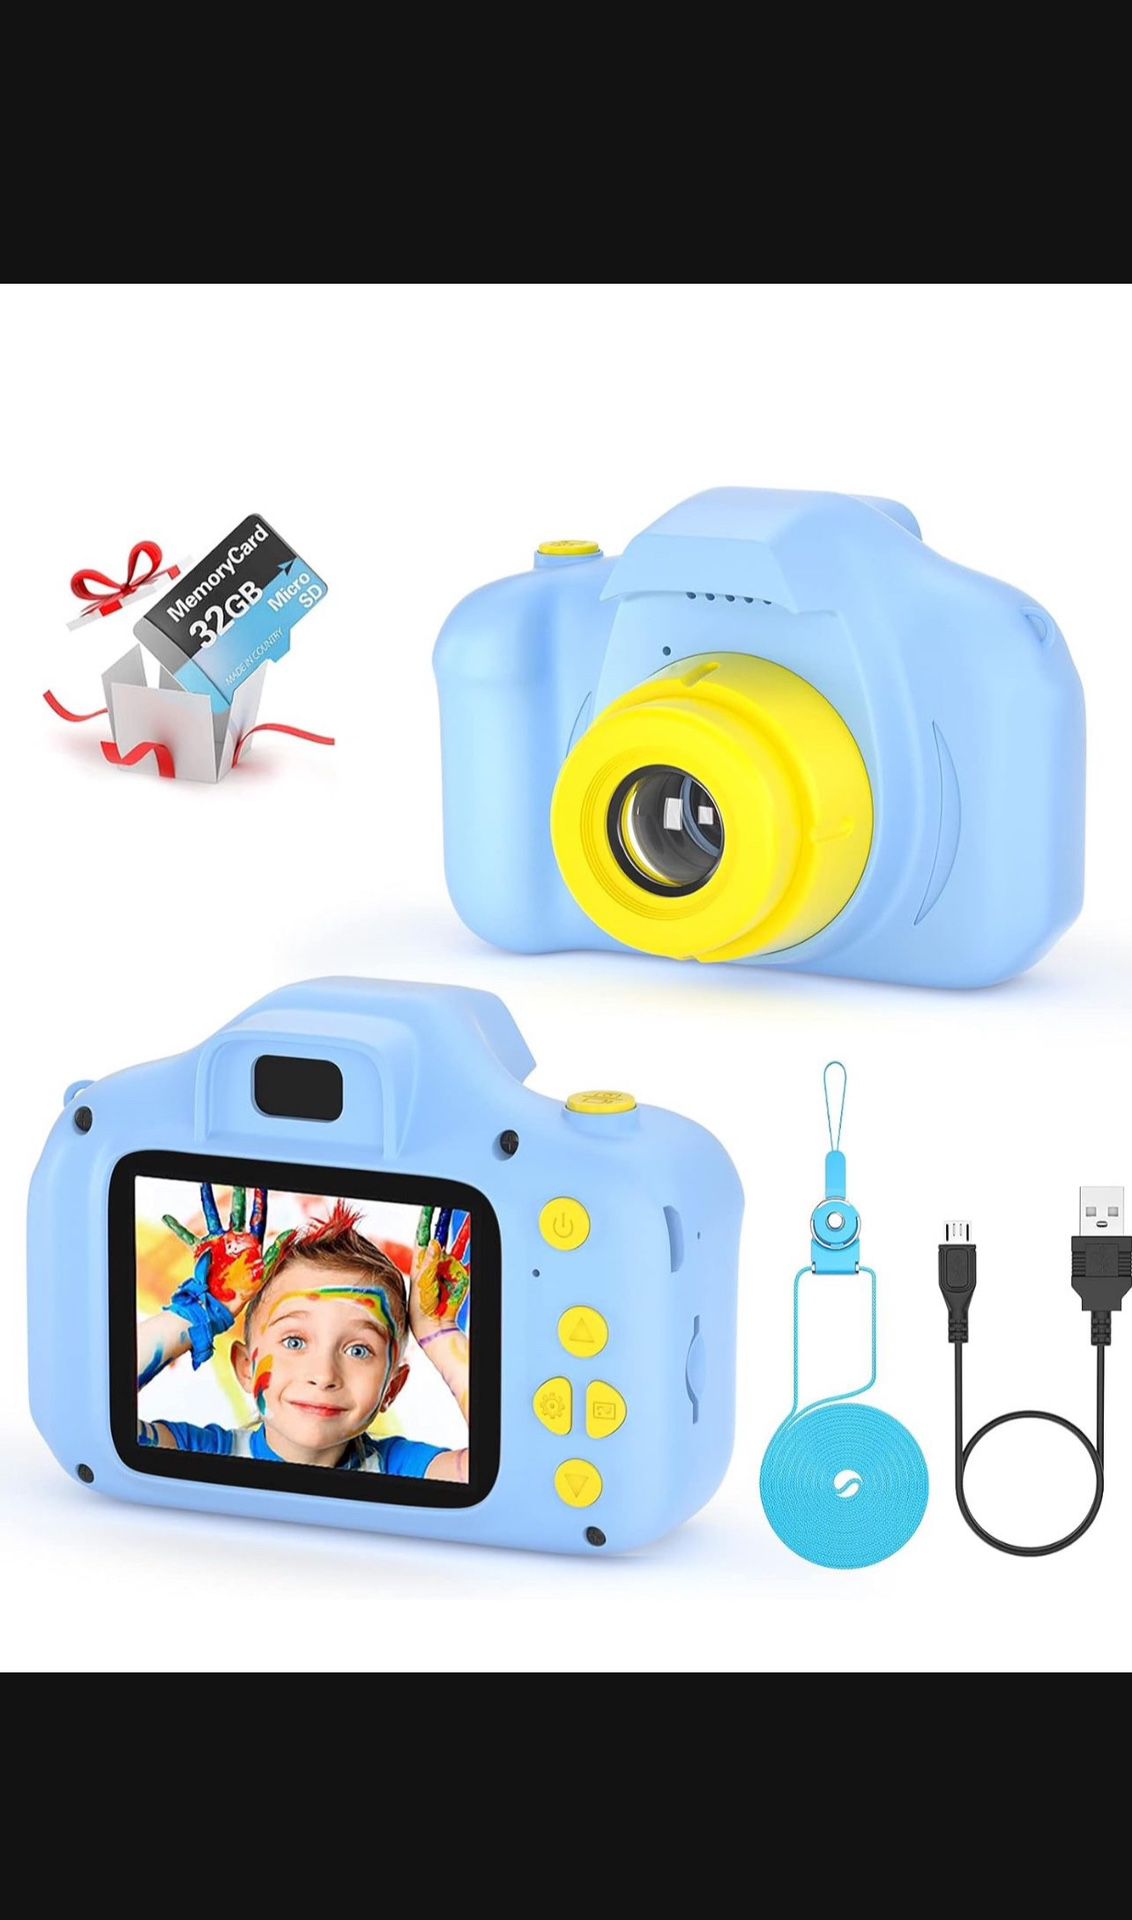 Kids Toys for 3-10 Year Old Boys Girls, Kids Camera 1080P 2inch HD Children Digital Cameras for Girls Best Birthday Toys,Toddler Camera Gift for 3-9 Y